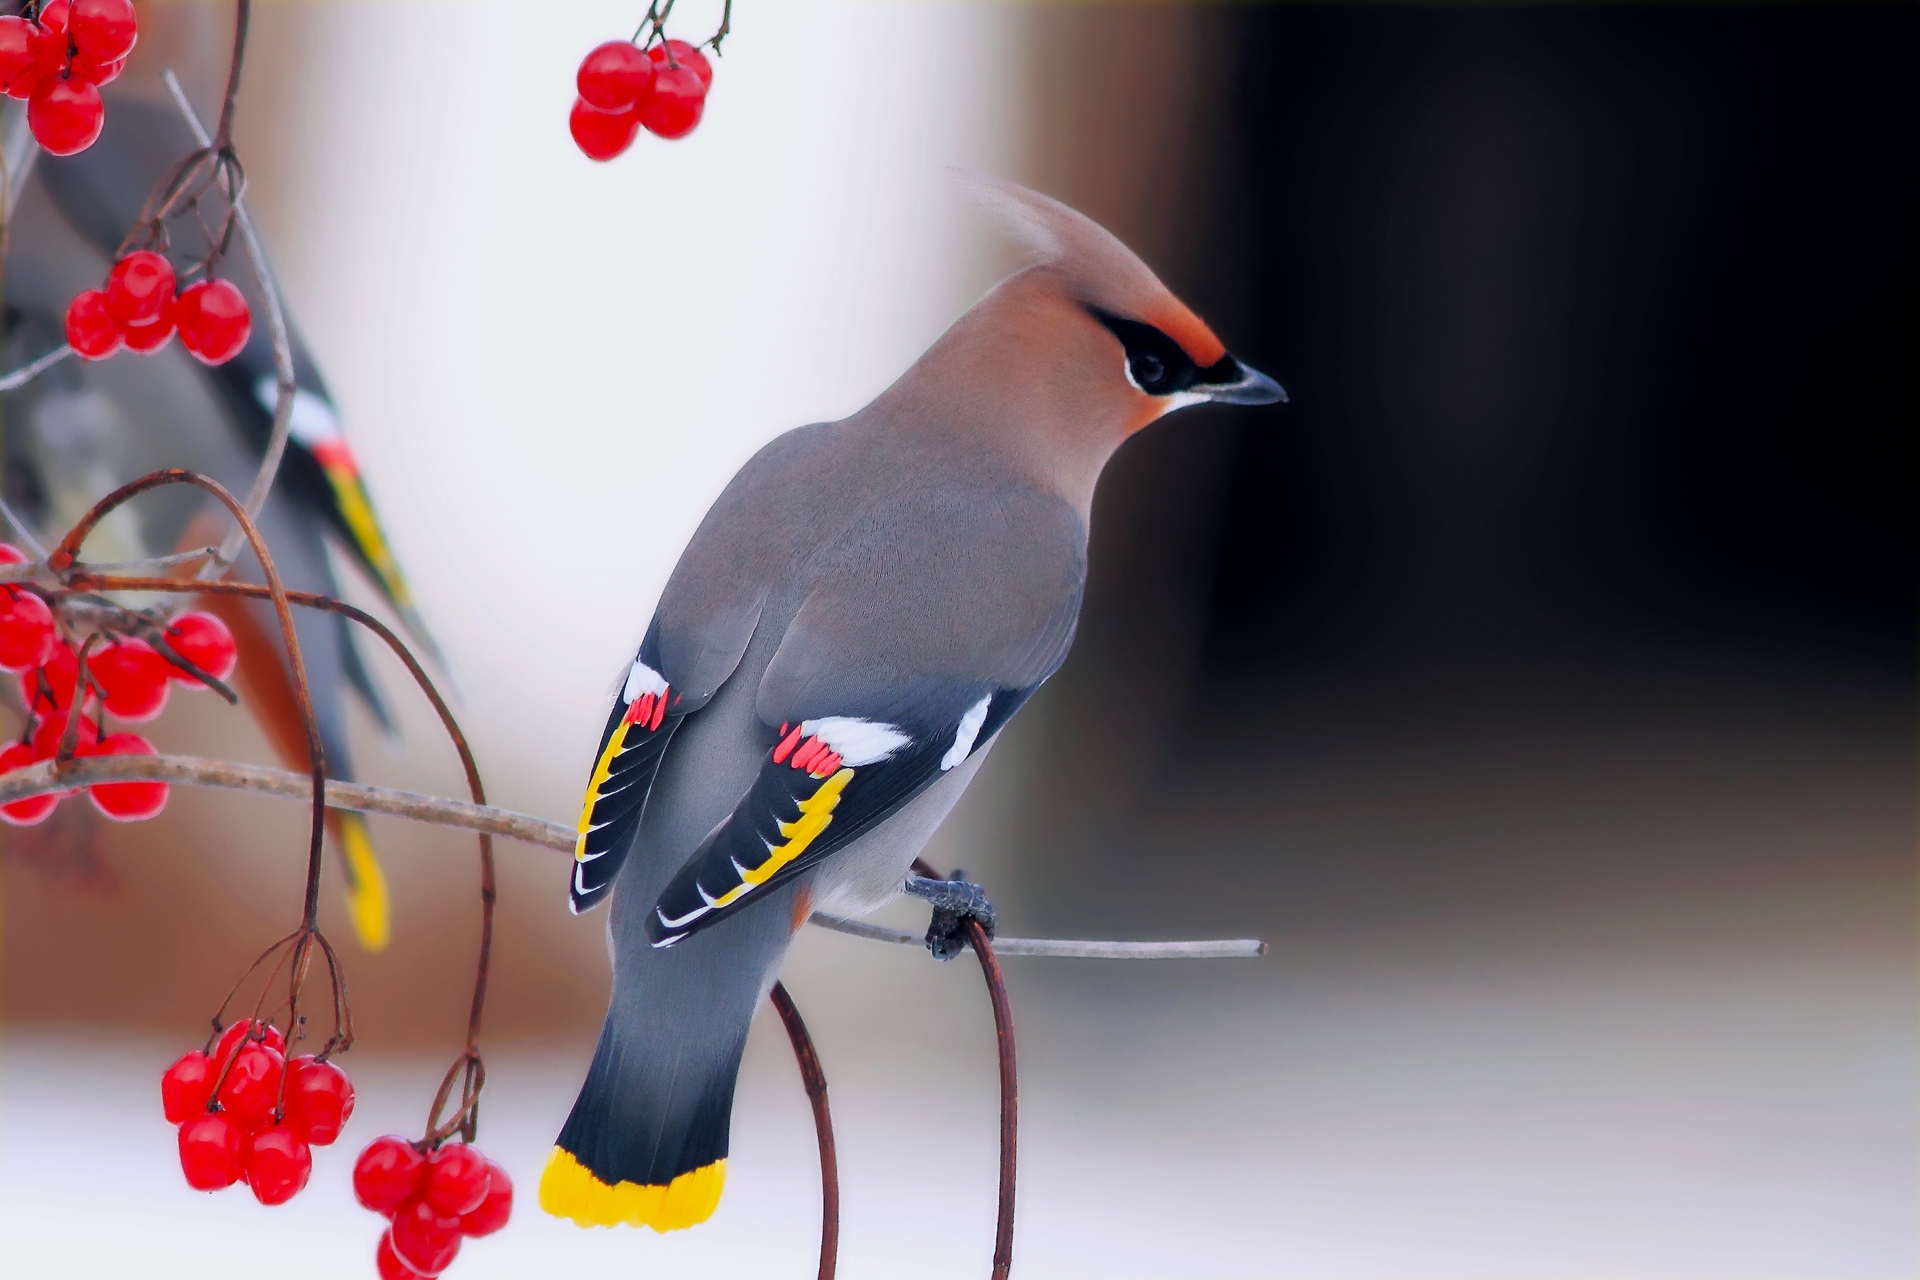 Popular Waxwing images for mobile phone